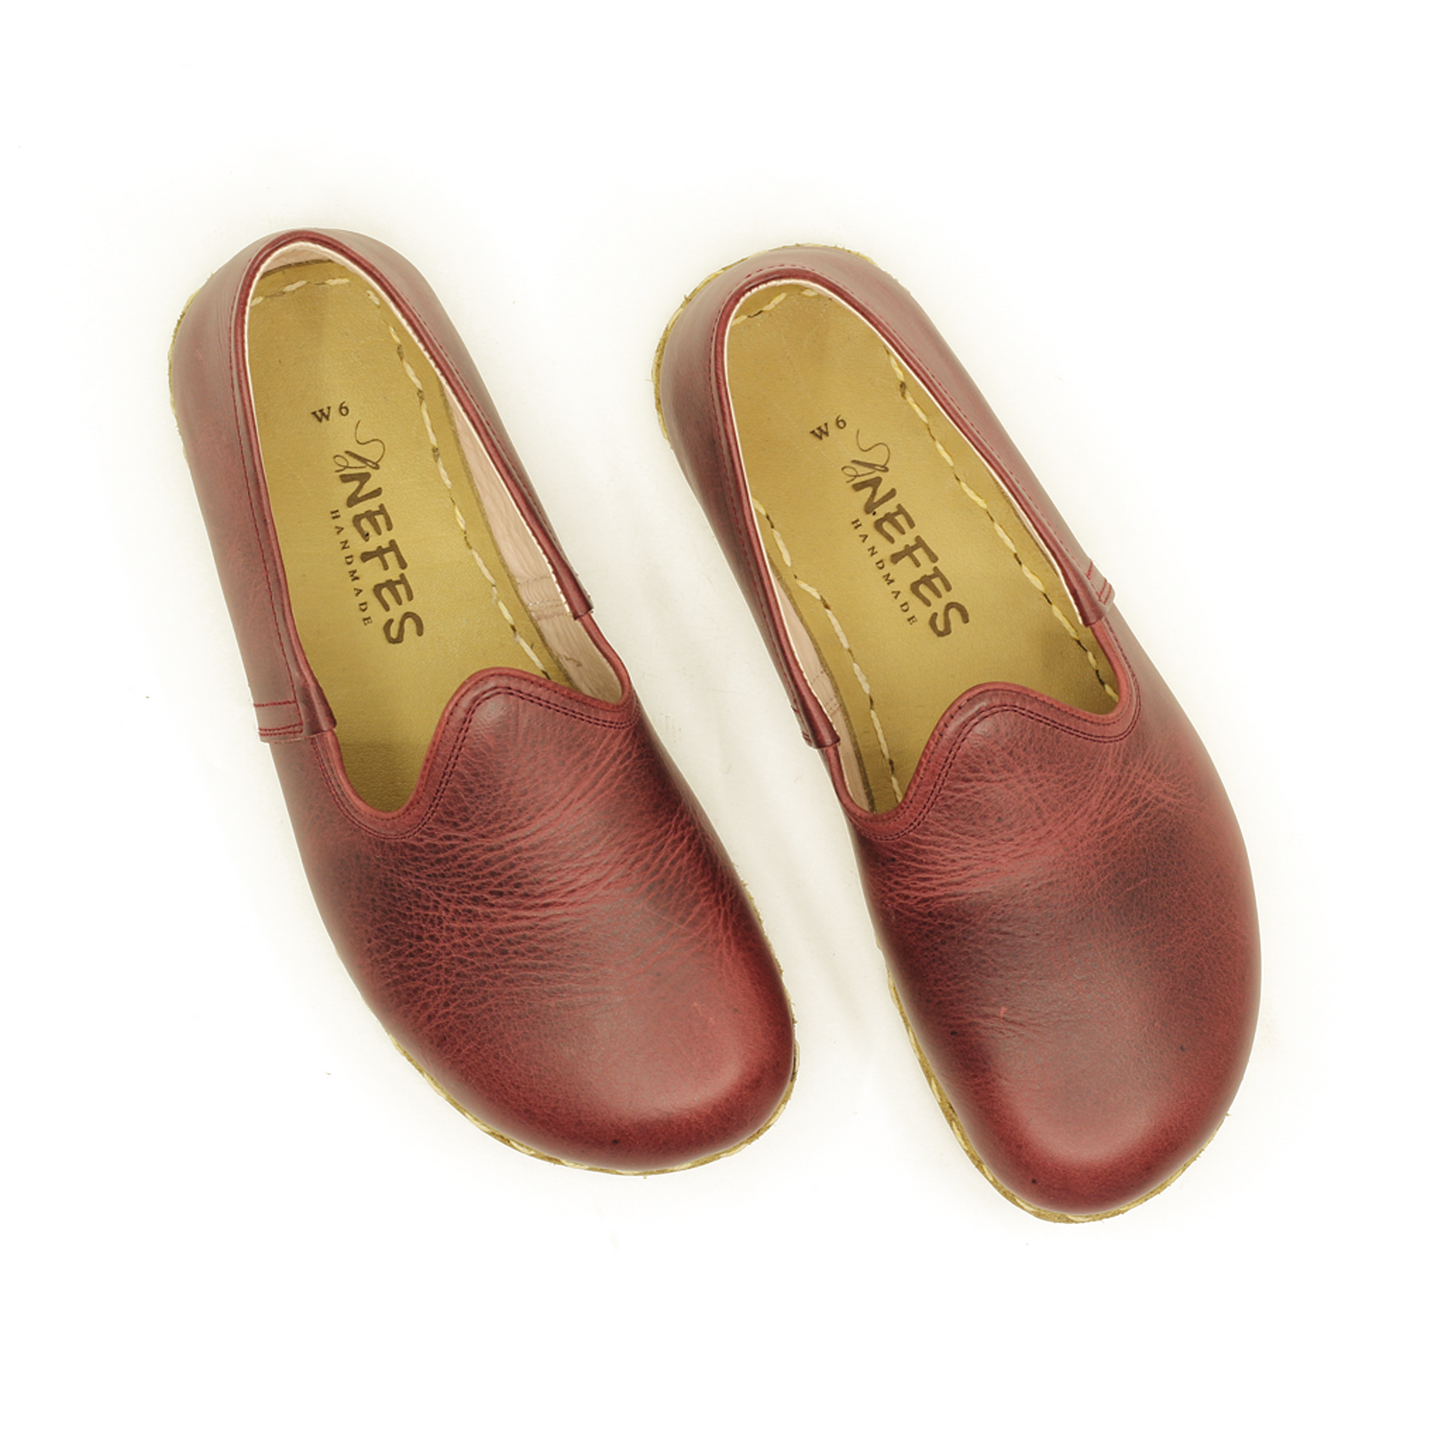 Handmade Turkish Yemeni Shoes in Crazy Claret Red Leather with Wide Front